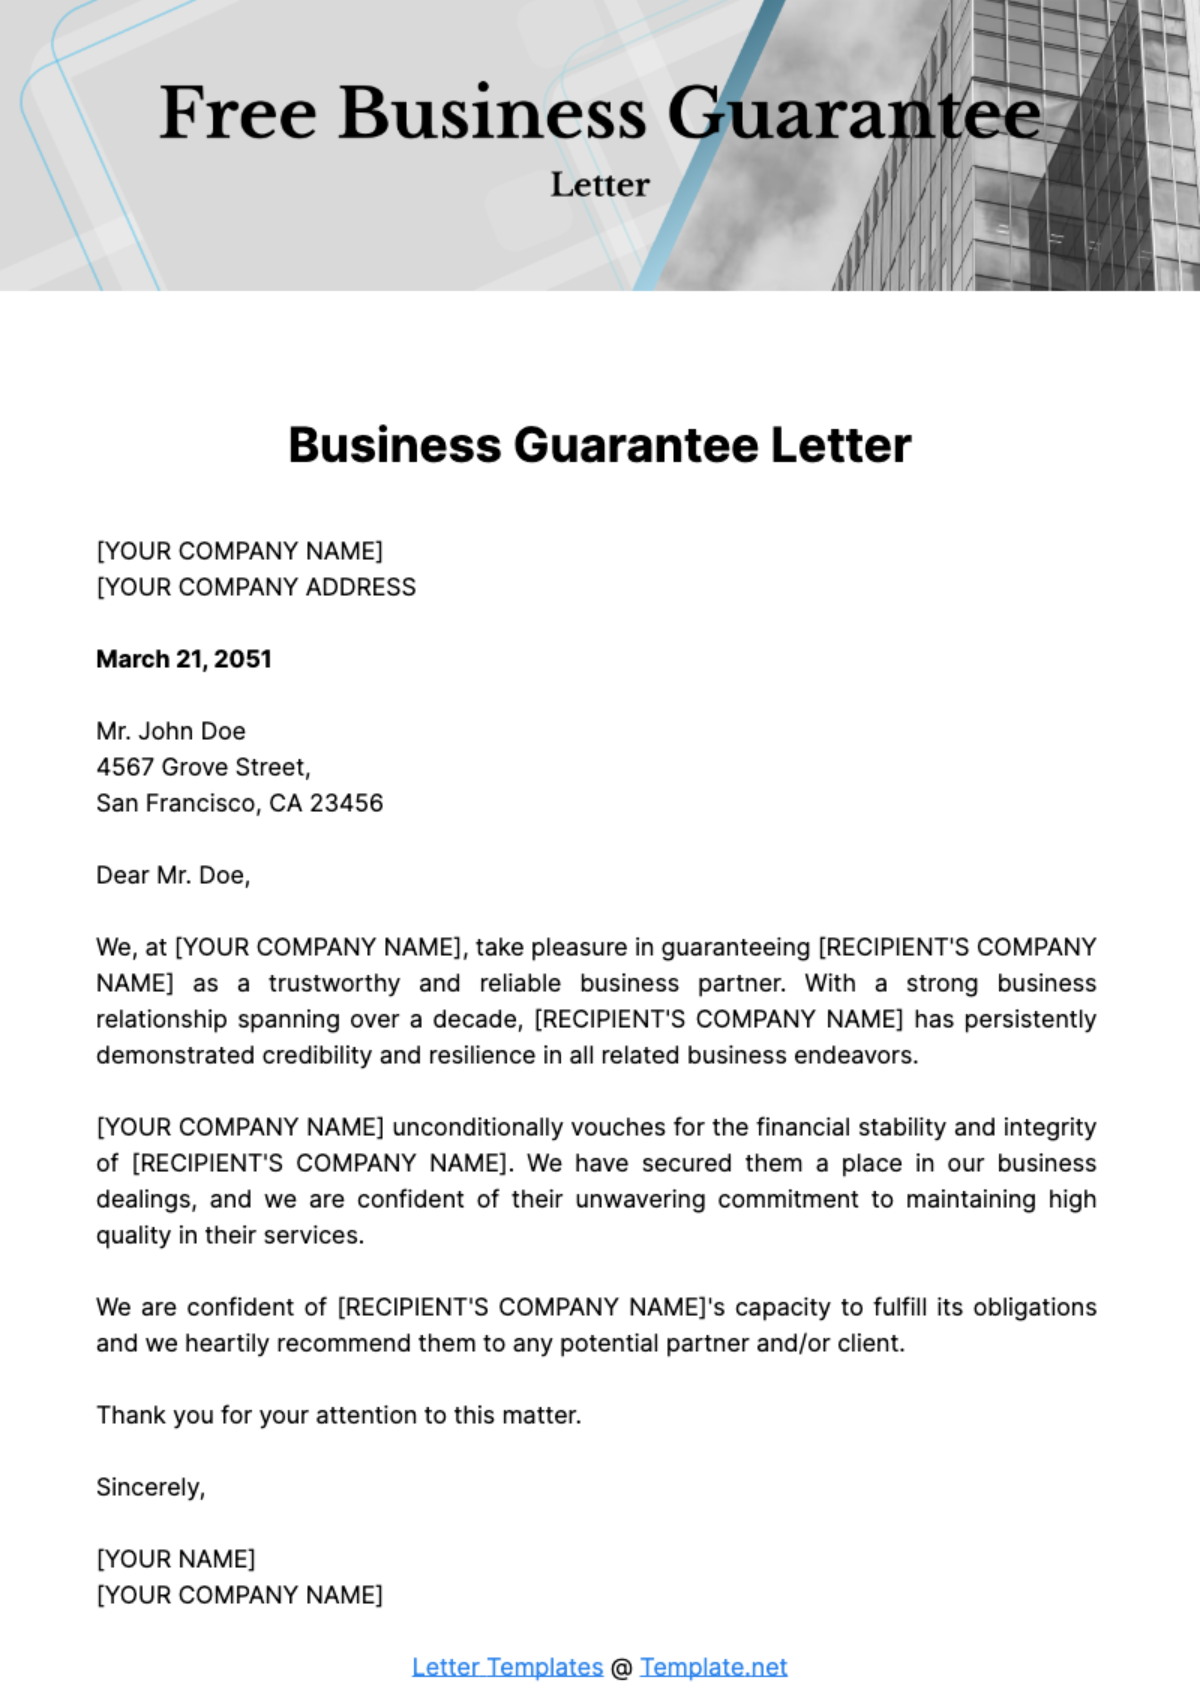 Free Business Guarantee Letter Template